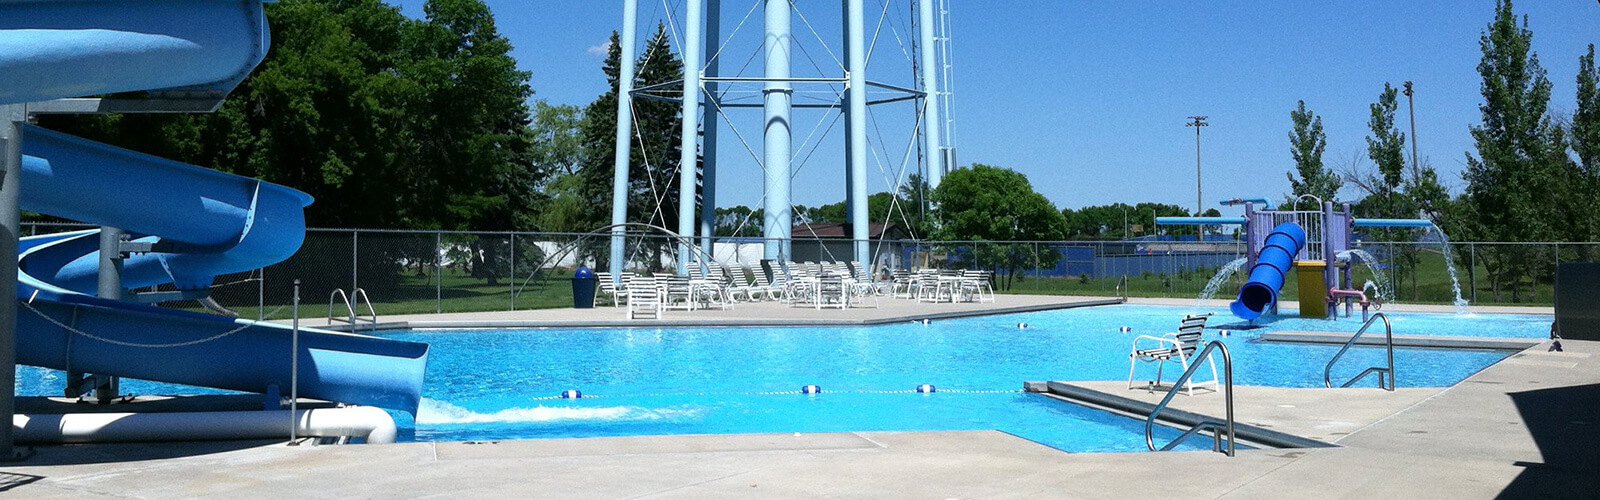 Mayville Water Park on a sunny day.